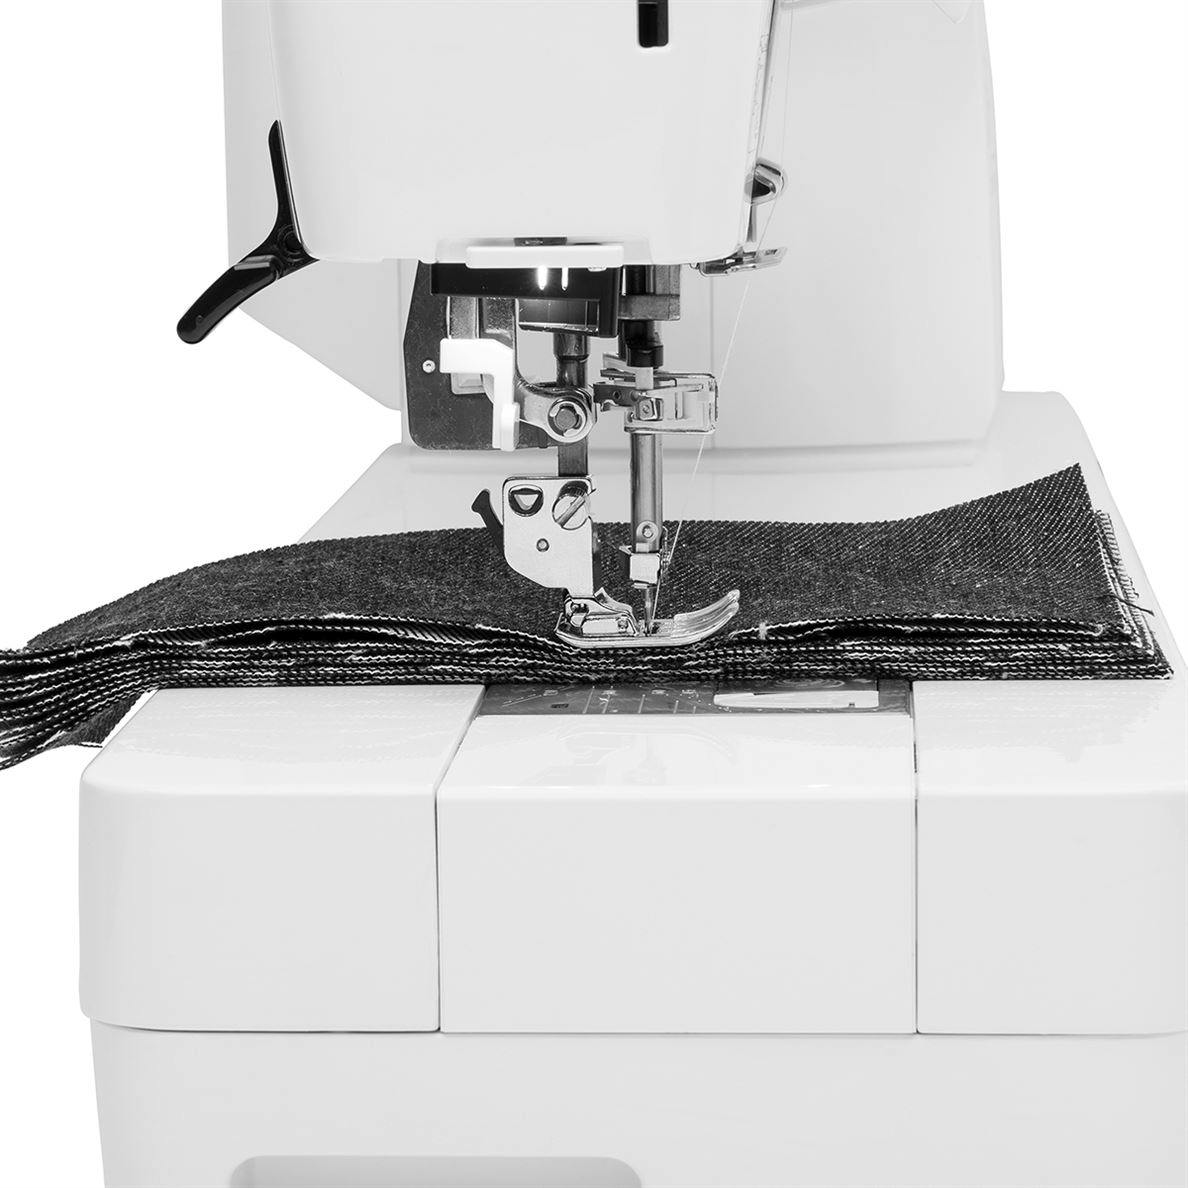 Janome Continental M7 Professional power